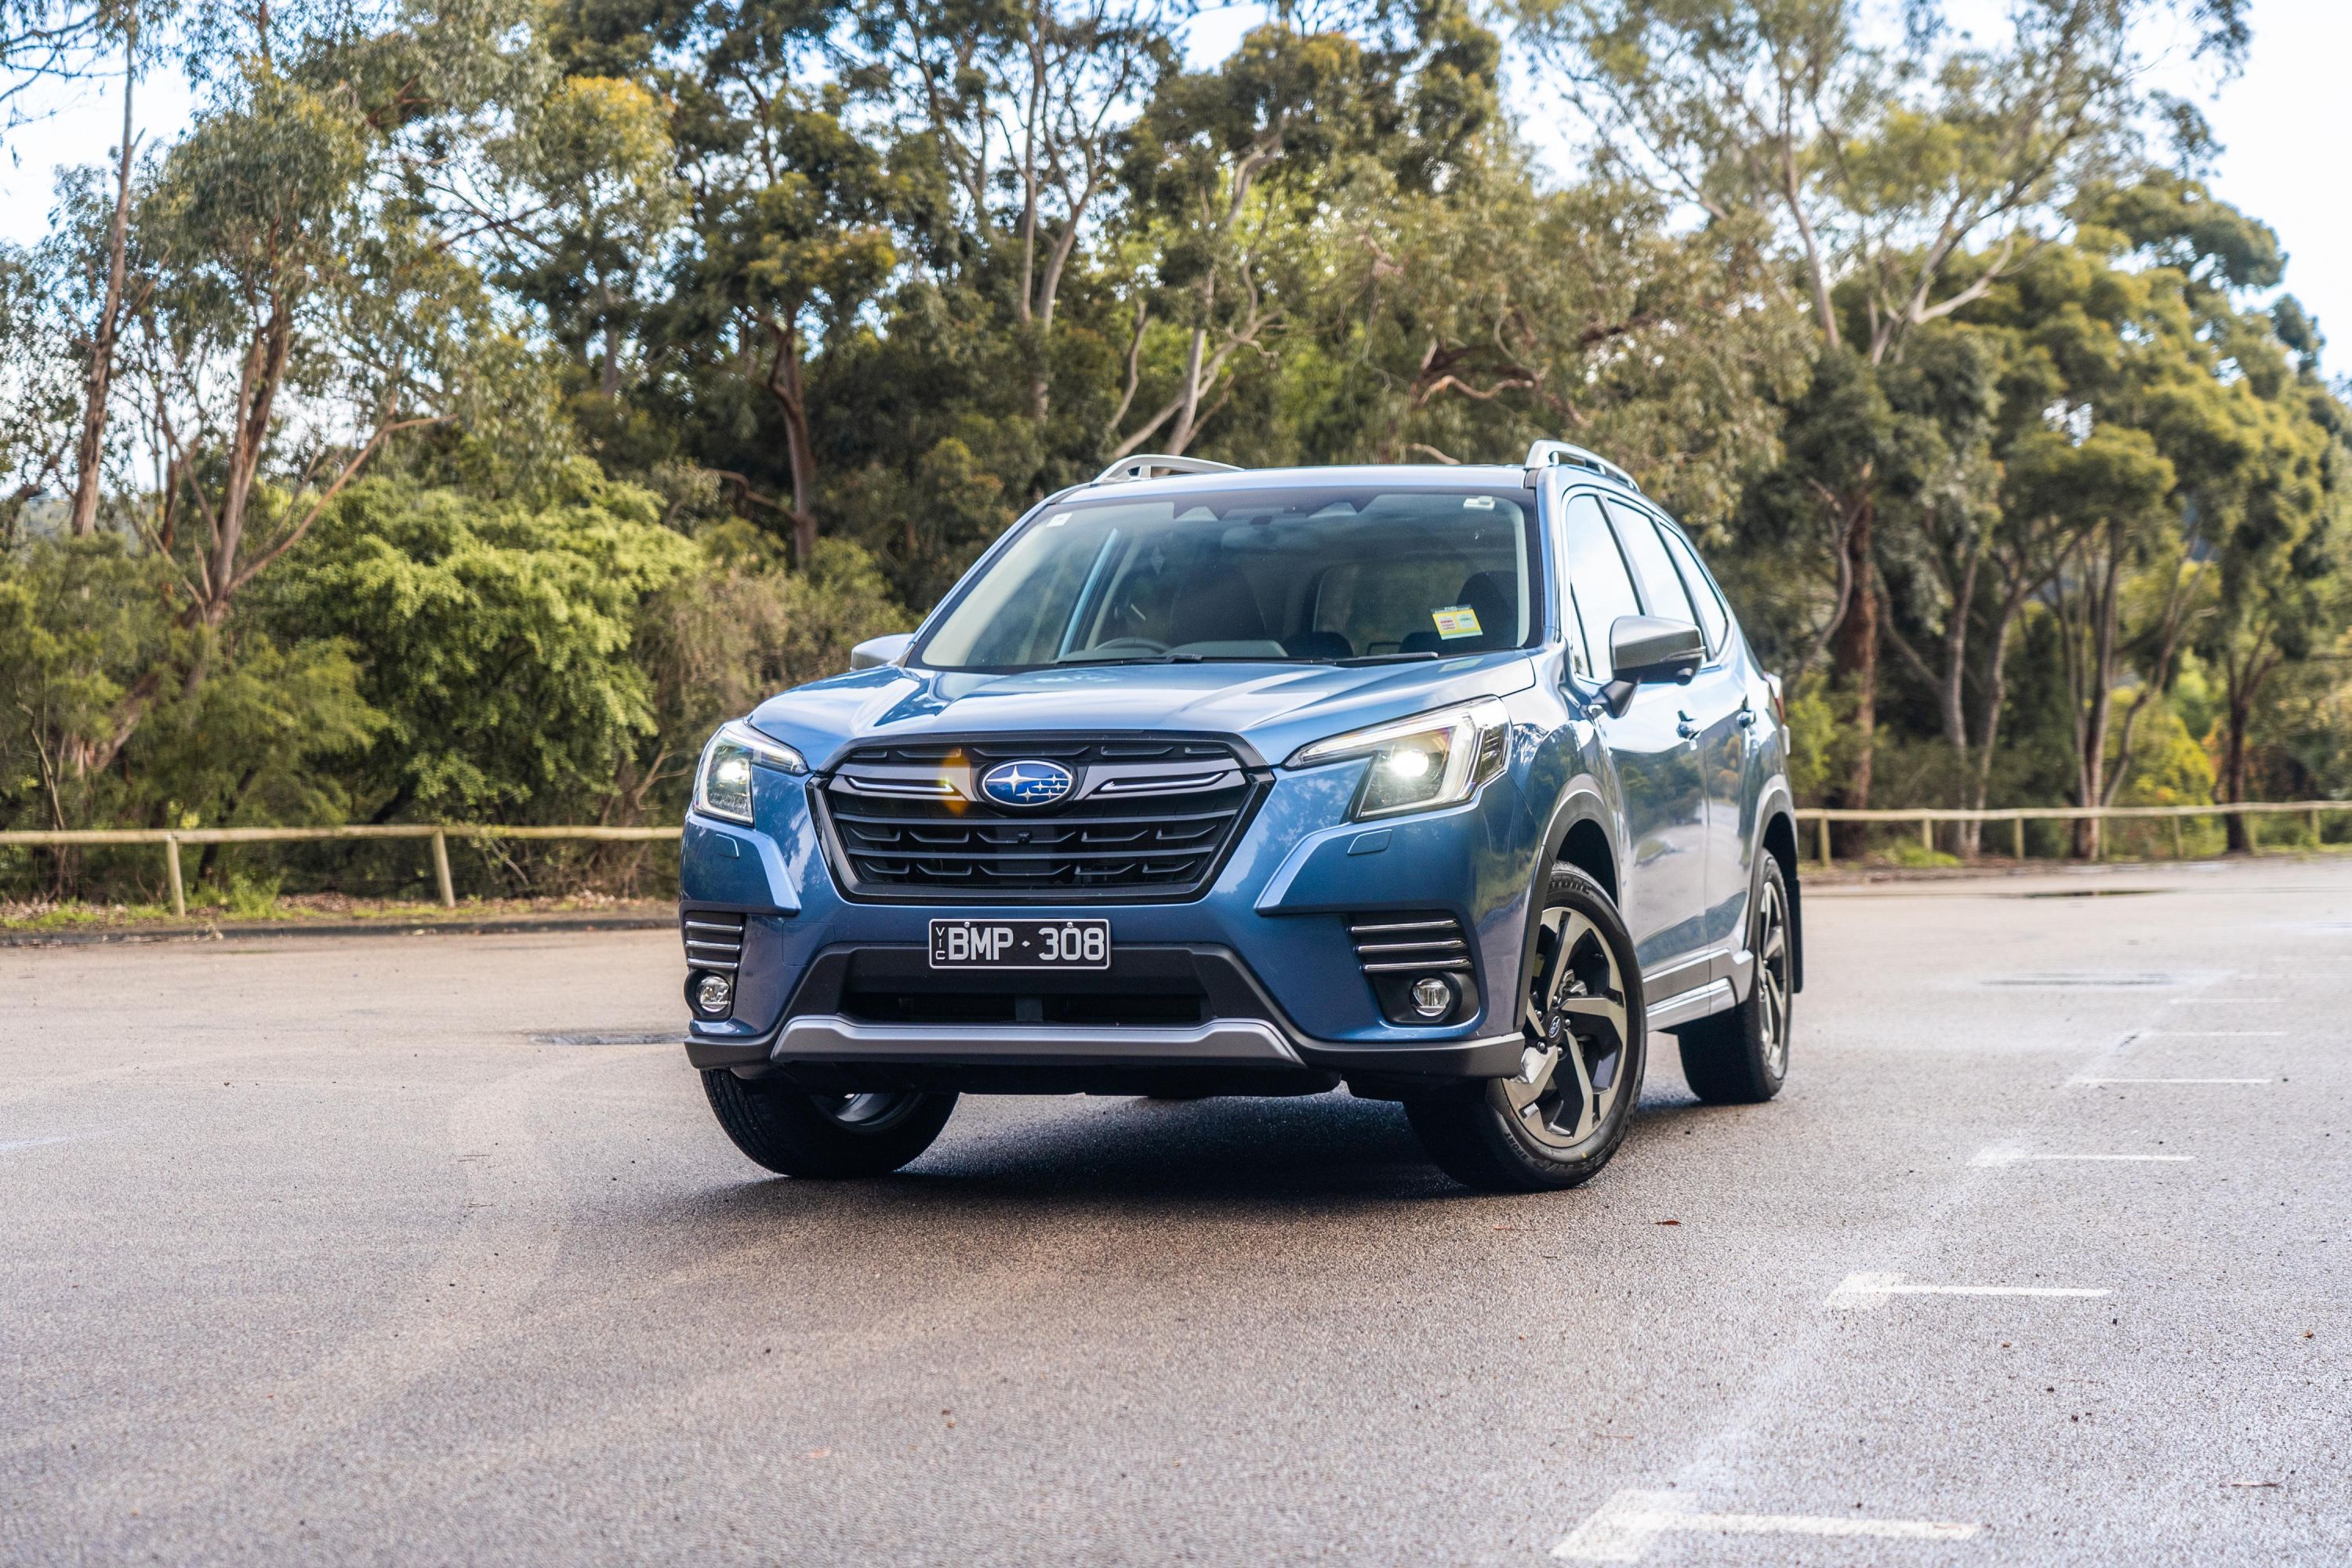 2019 Subaru Forester review: 2.5i-L - Drive